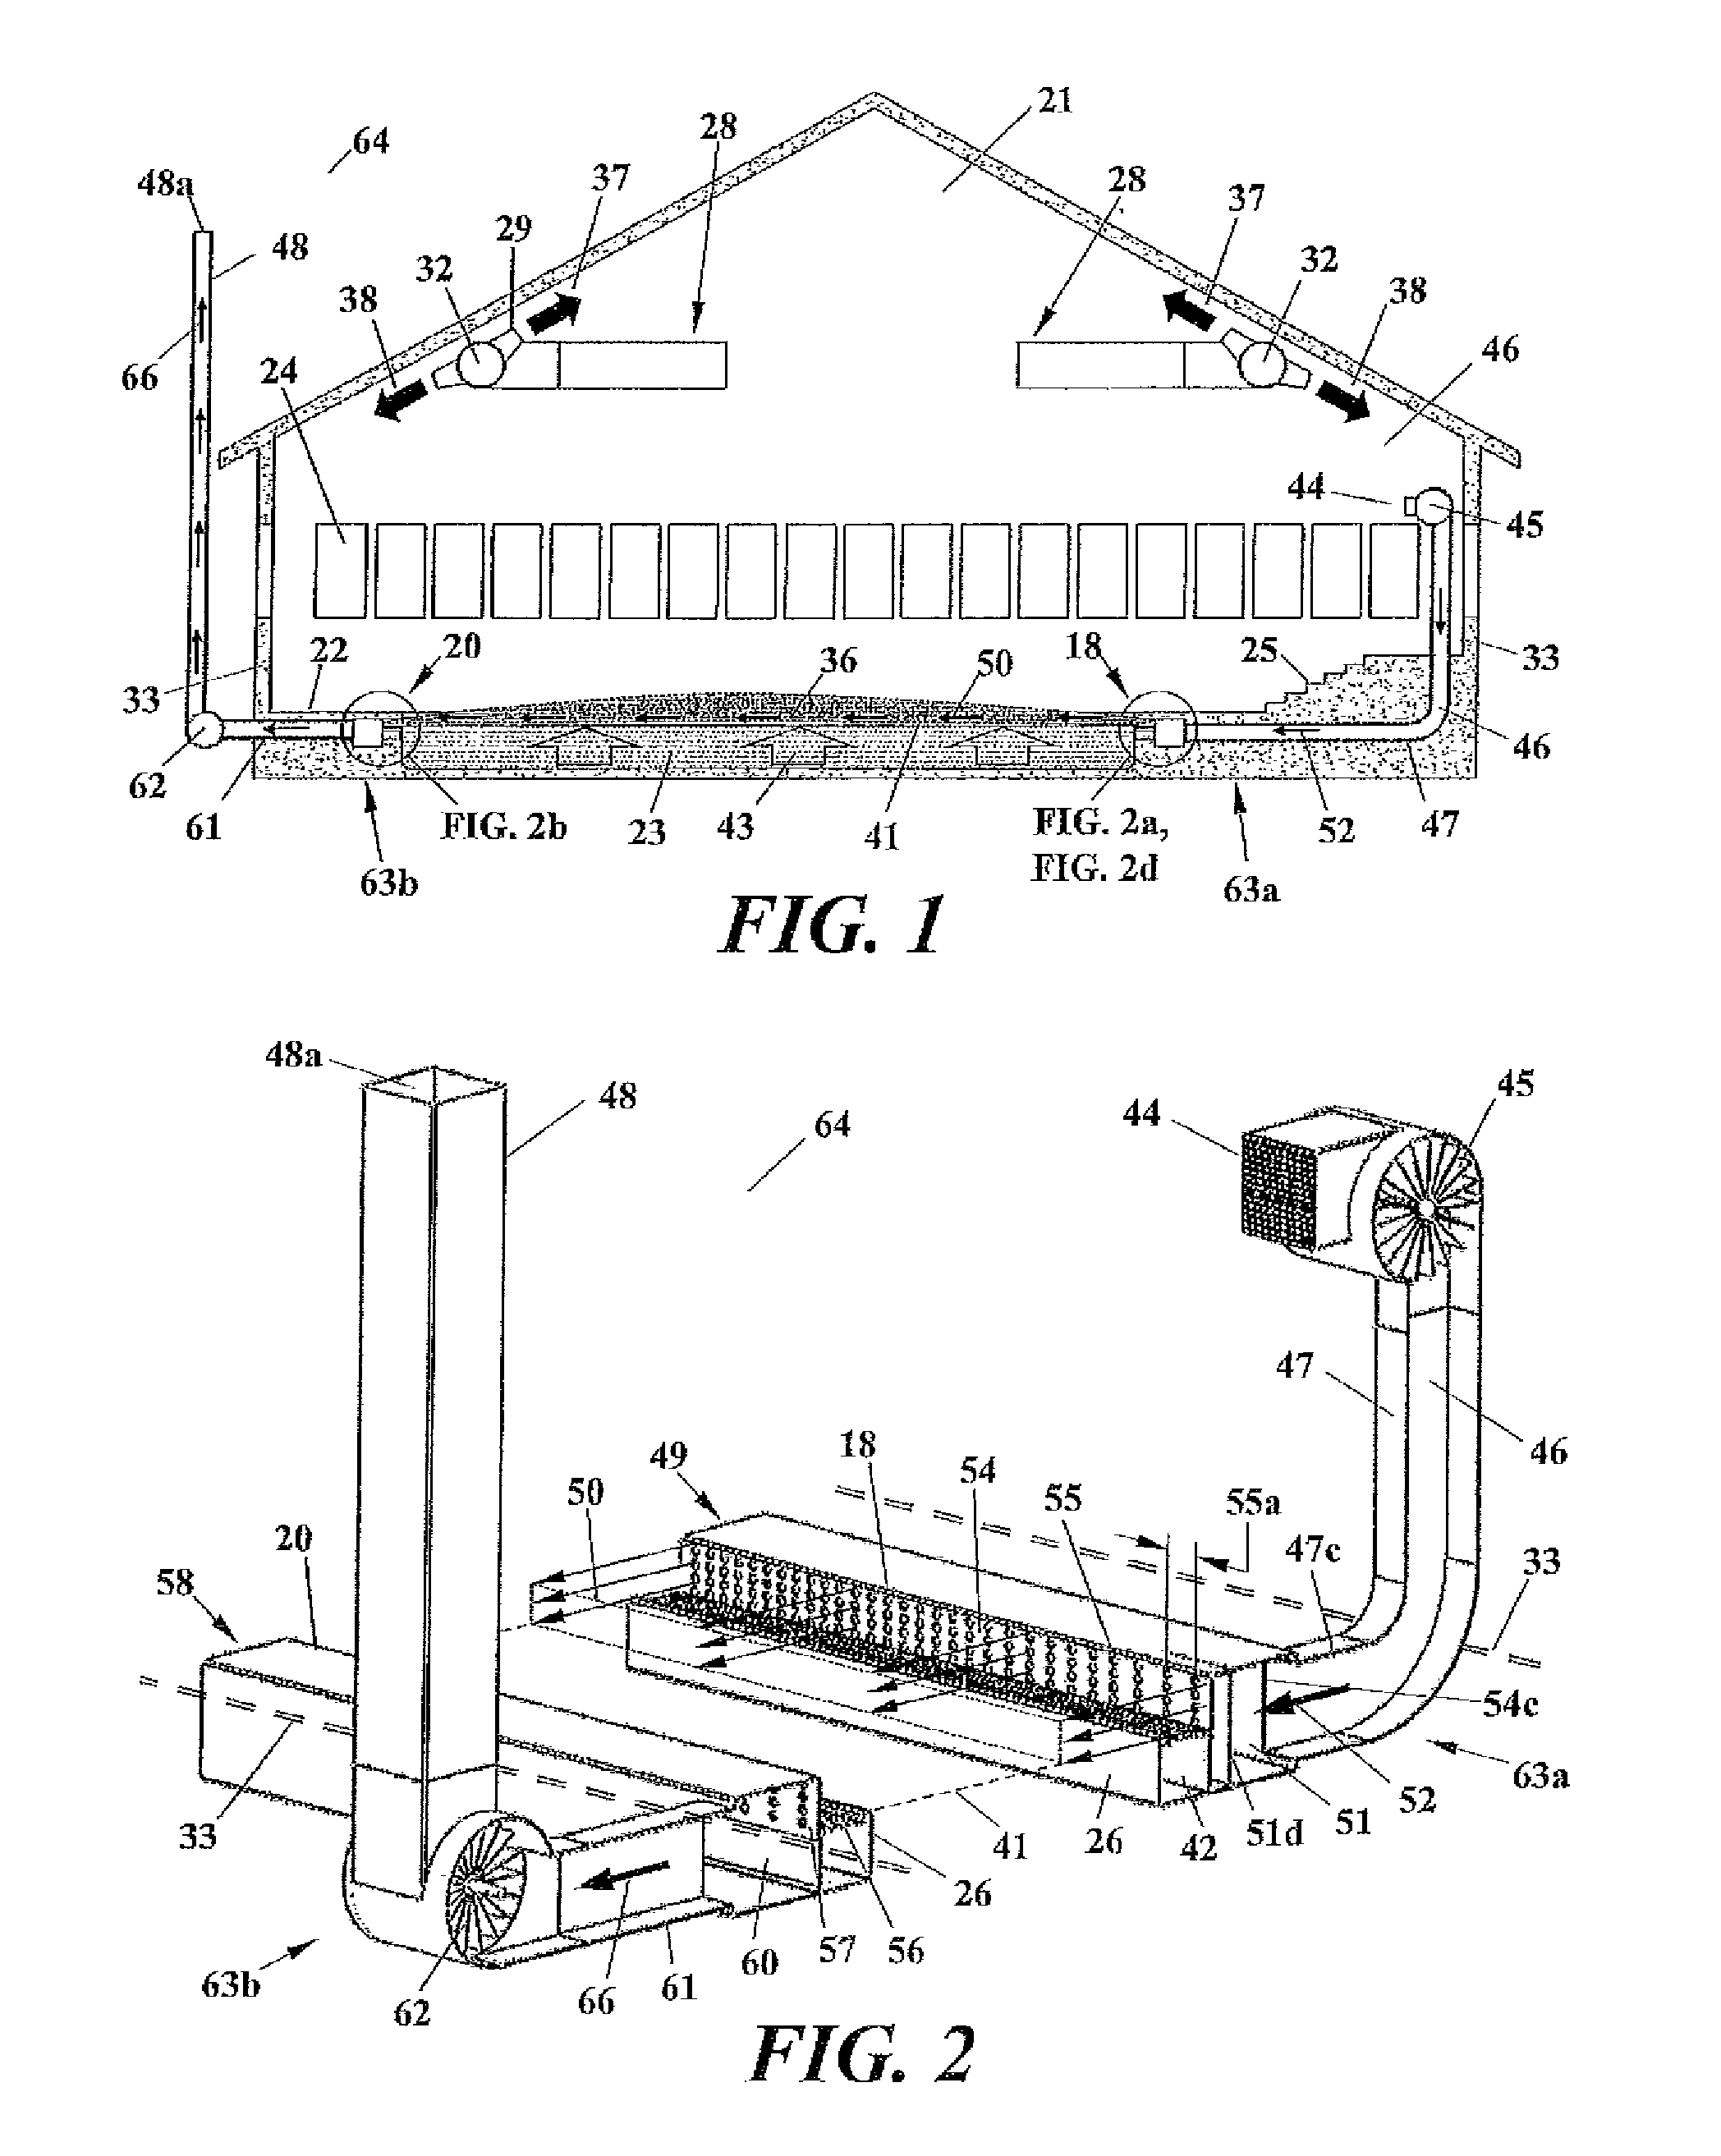 Self-contained system for scavenging contaminated air from above the water surface of an indoor swimming pool